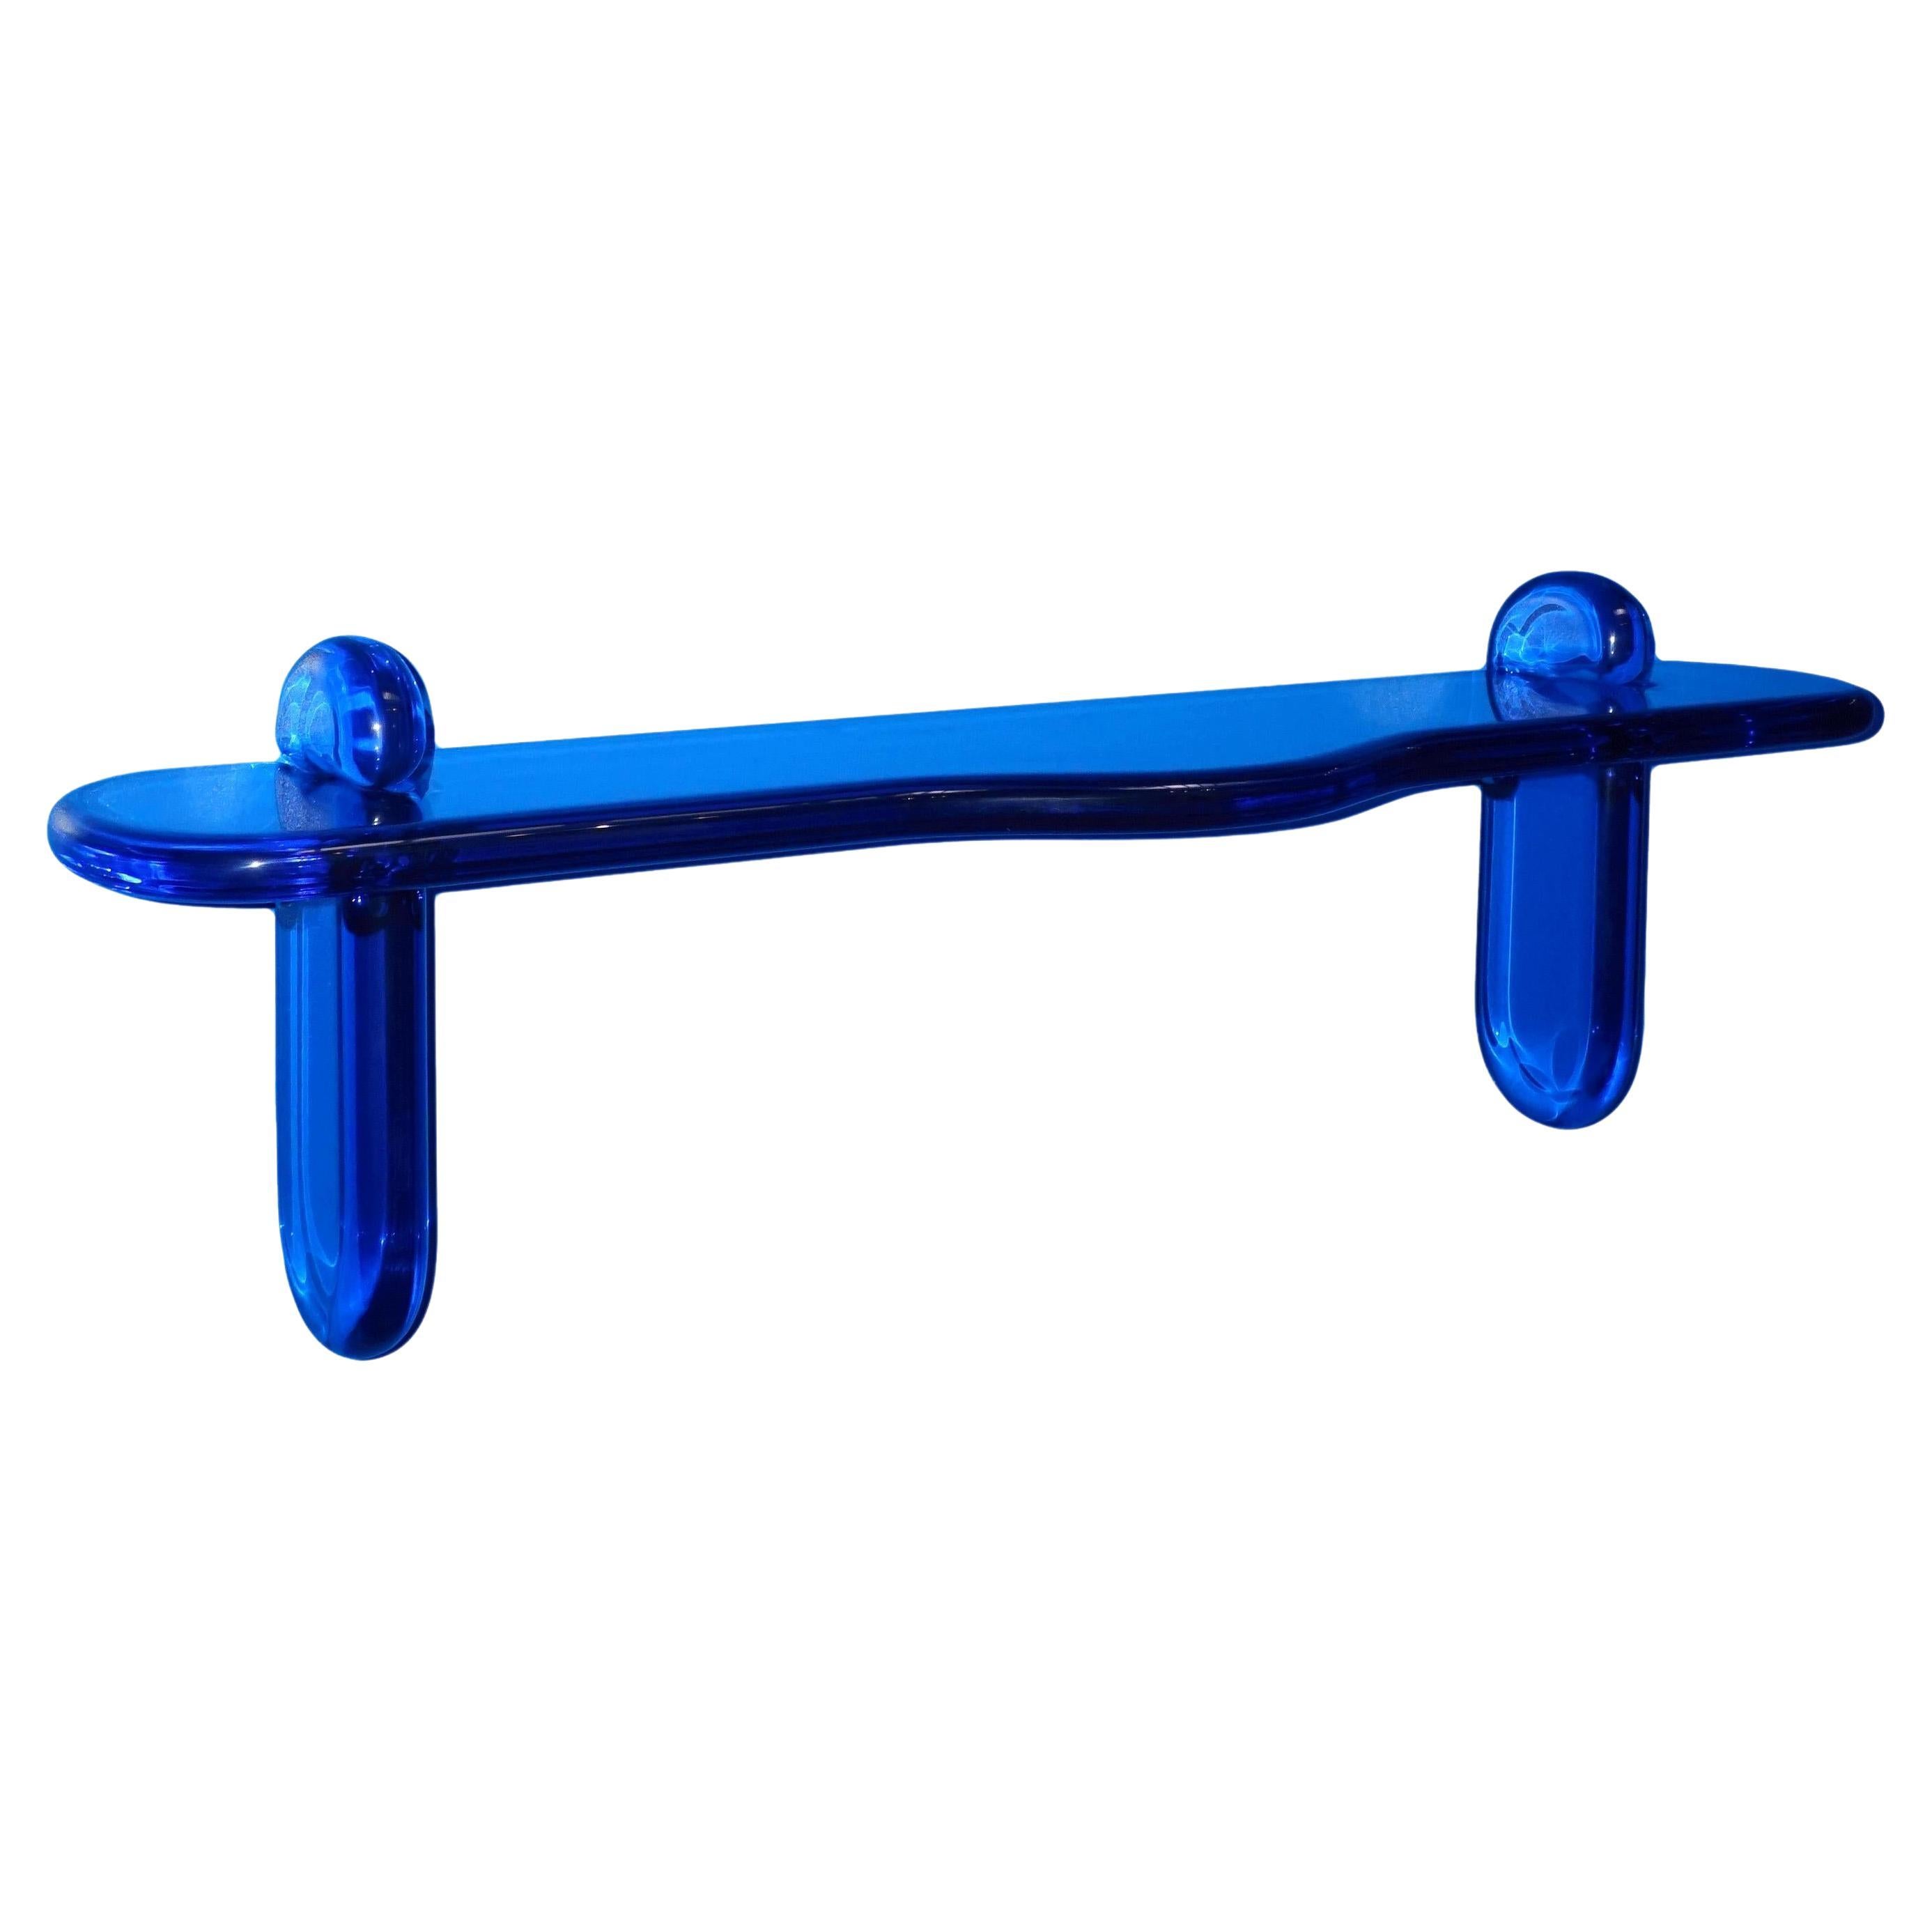 Plump Shelf by Ian Cochran, Represented by Tuleste Factory For Sale